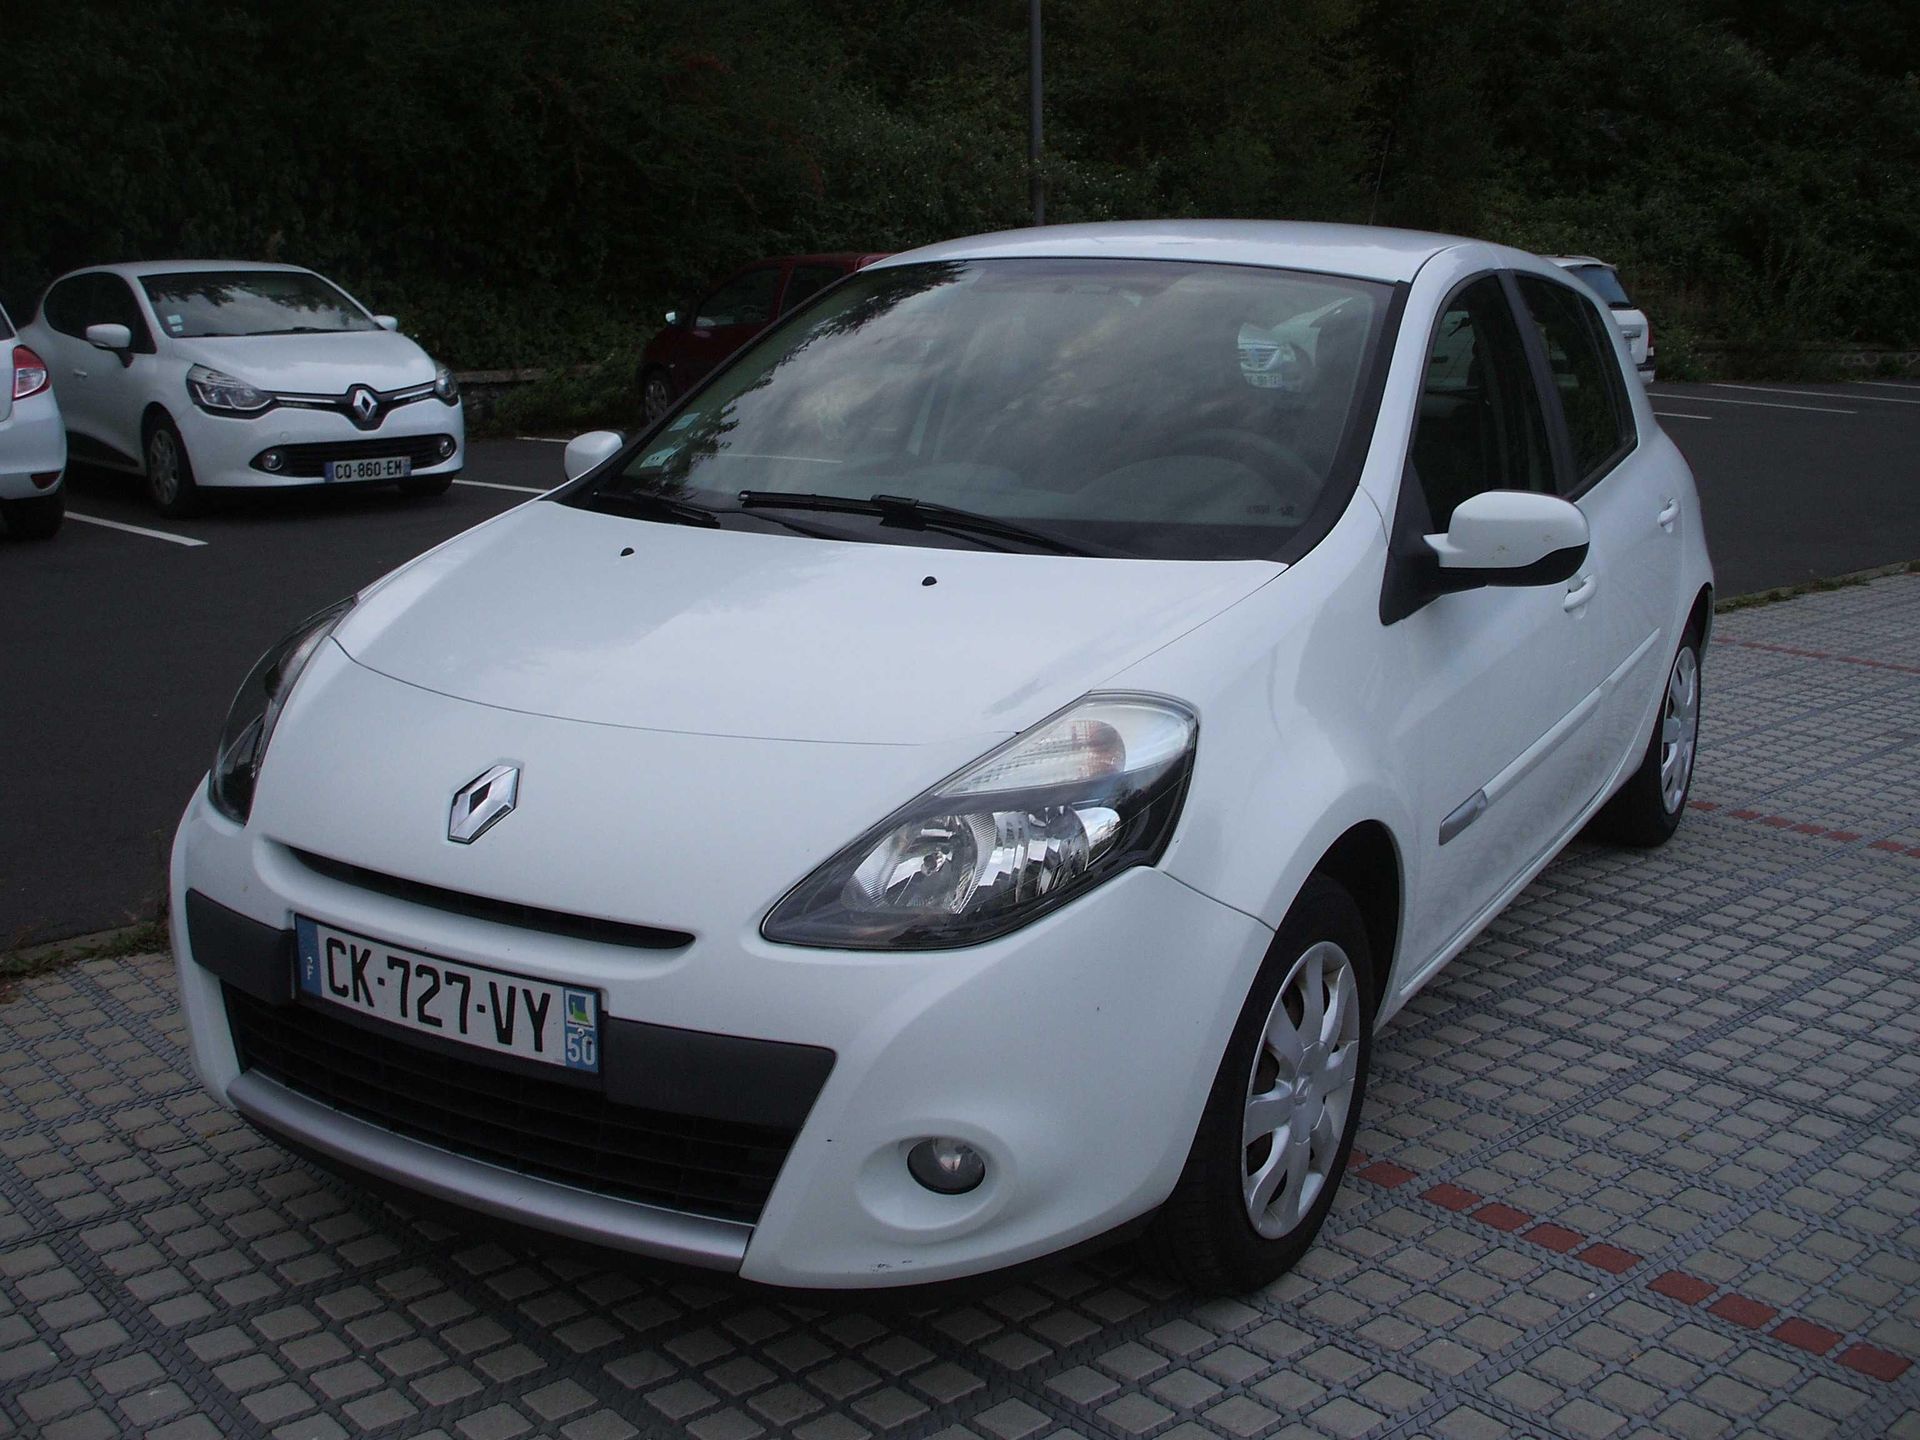 Null [CT] RENAULT Clio III Phase 2 1.5 dCi eco2 75 cv, Gazole, imm. CK-727-VY, t&hellip;